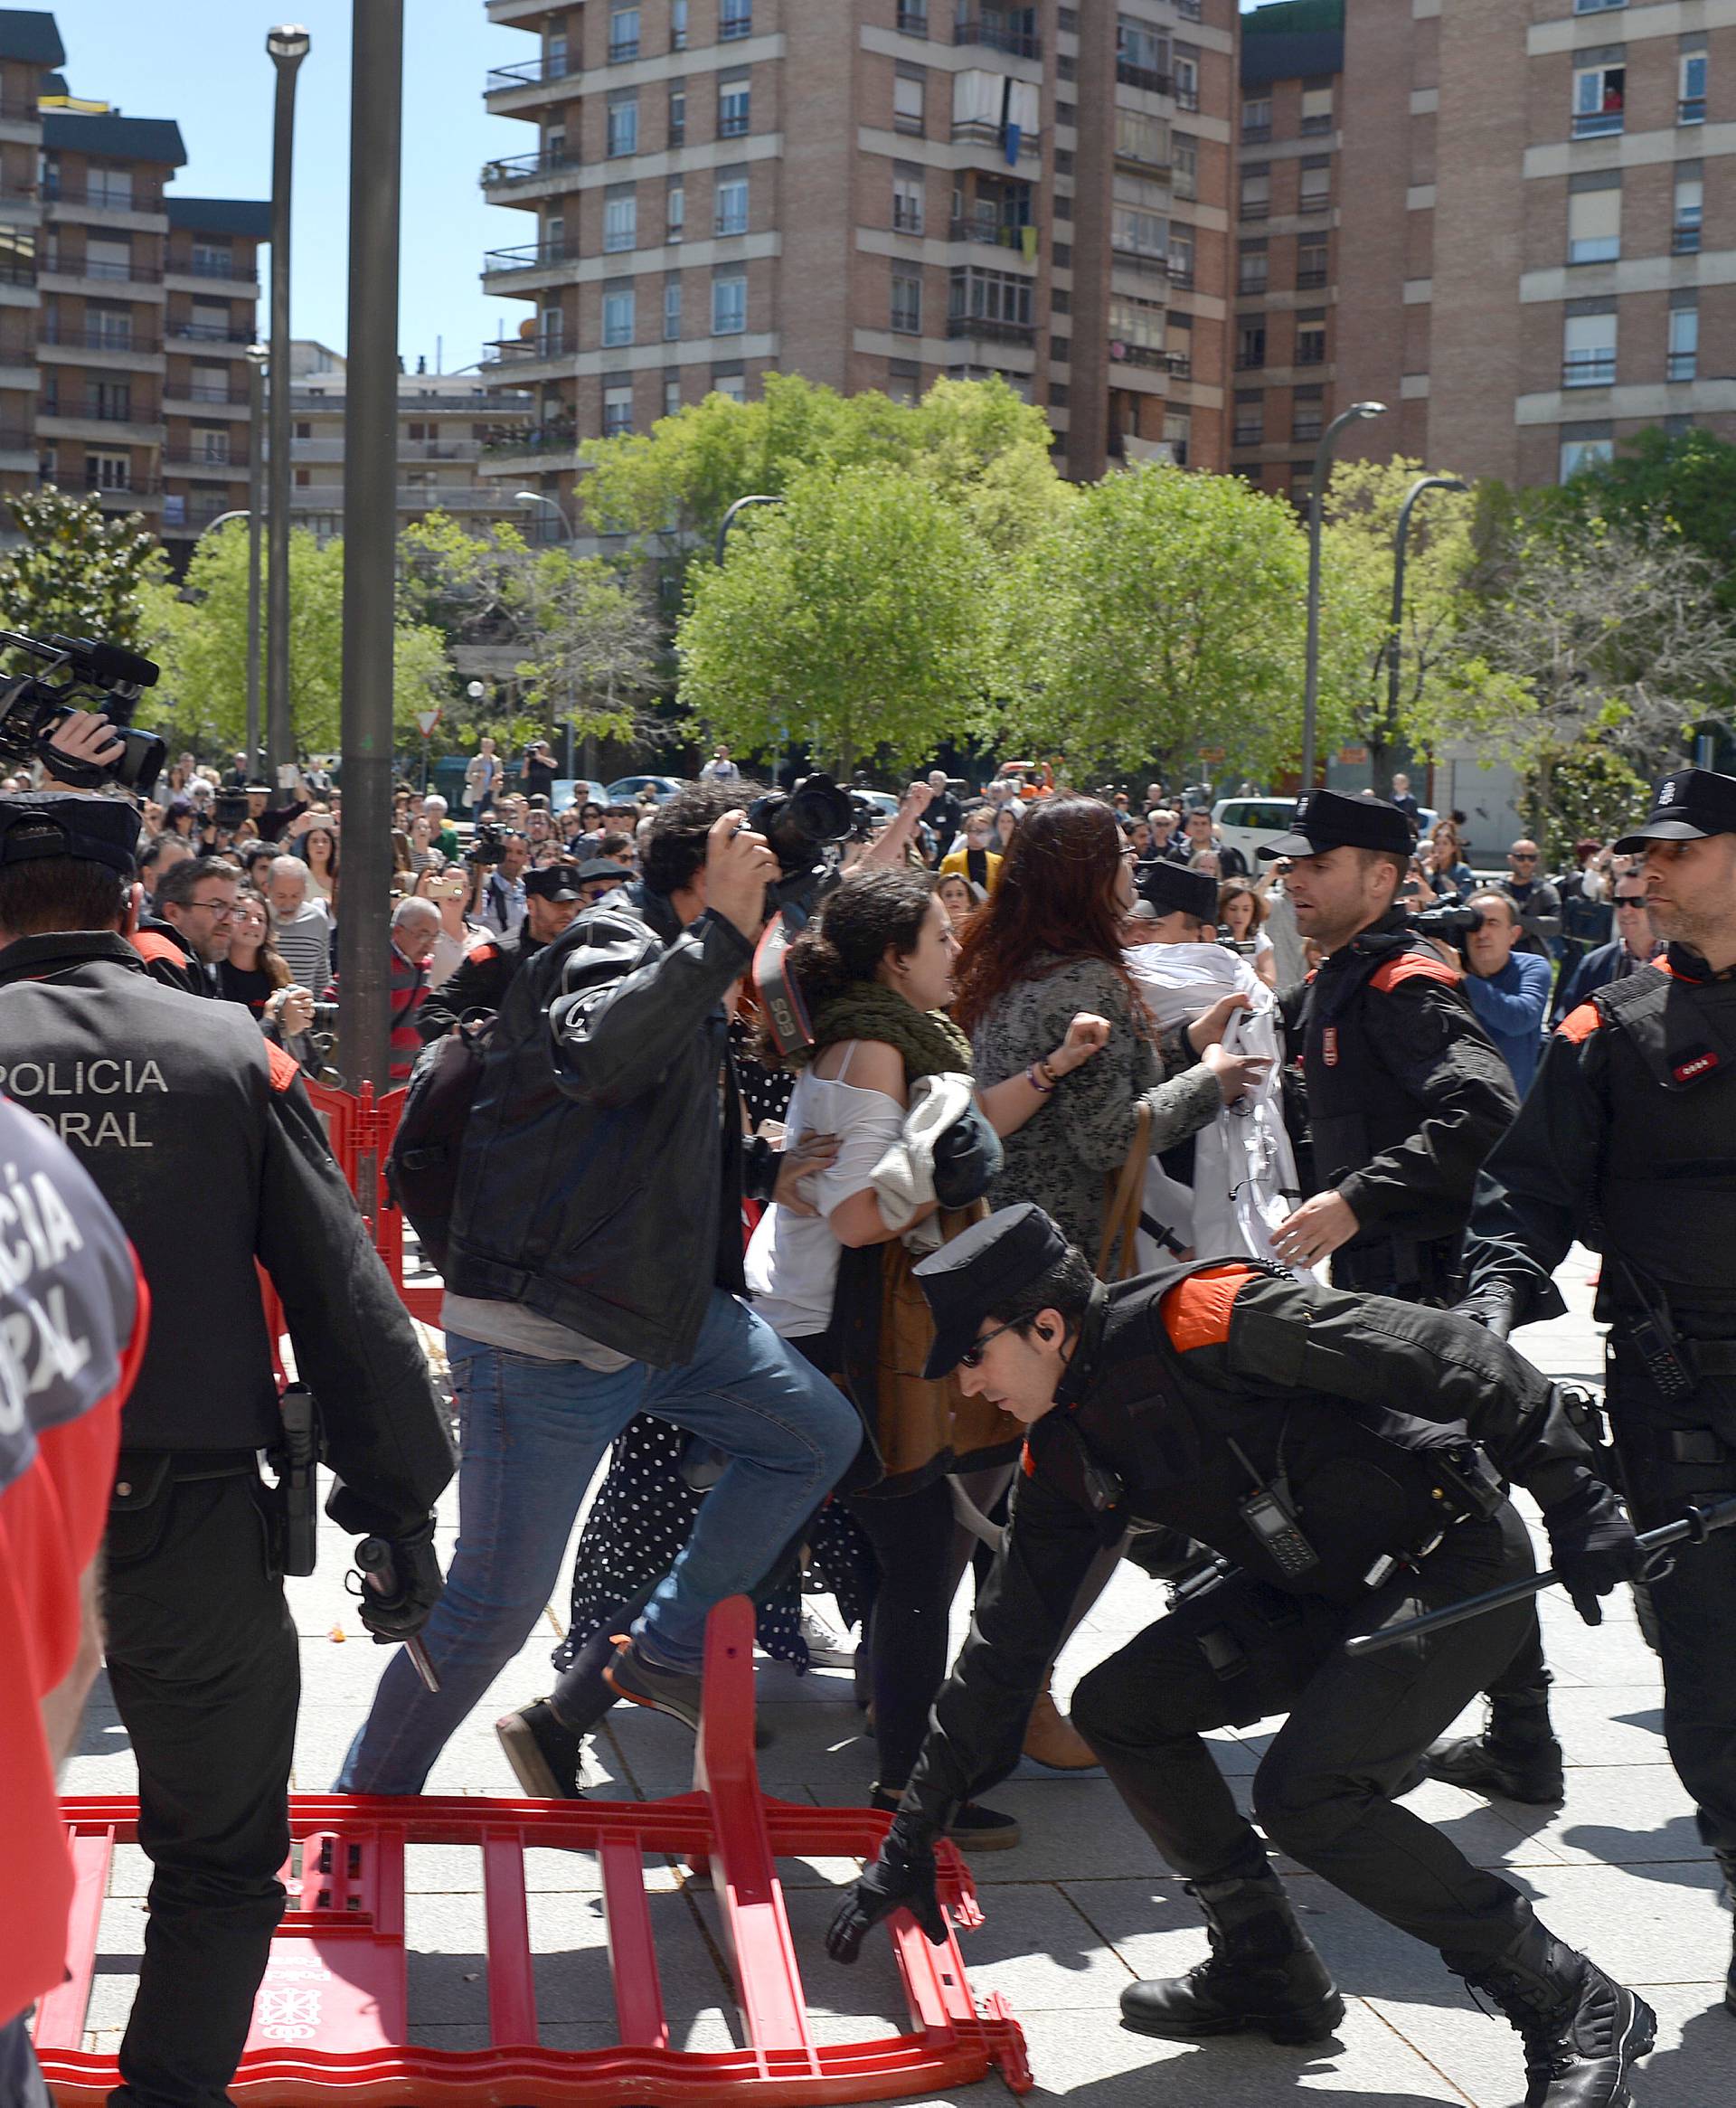 Protesters break through a police line after a nine-year sentence was given to five men accused of the multiple rape of a woman during Pamplona's San Fermin festival in 2016